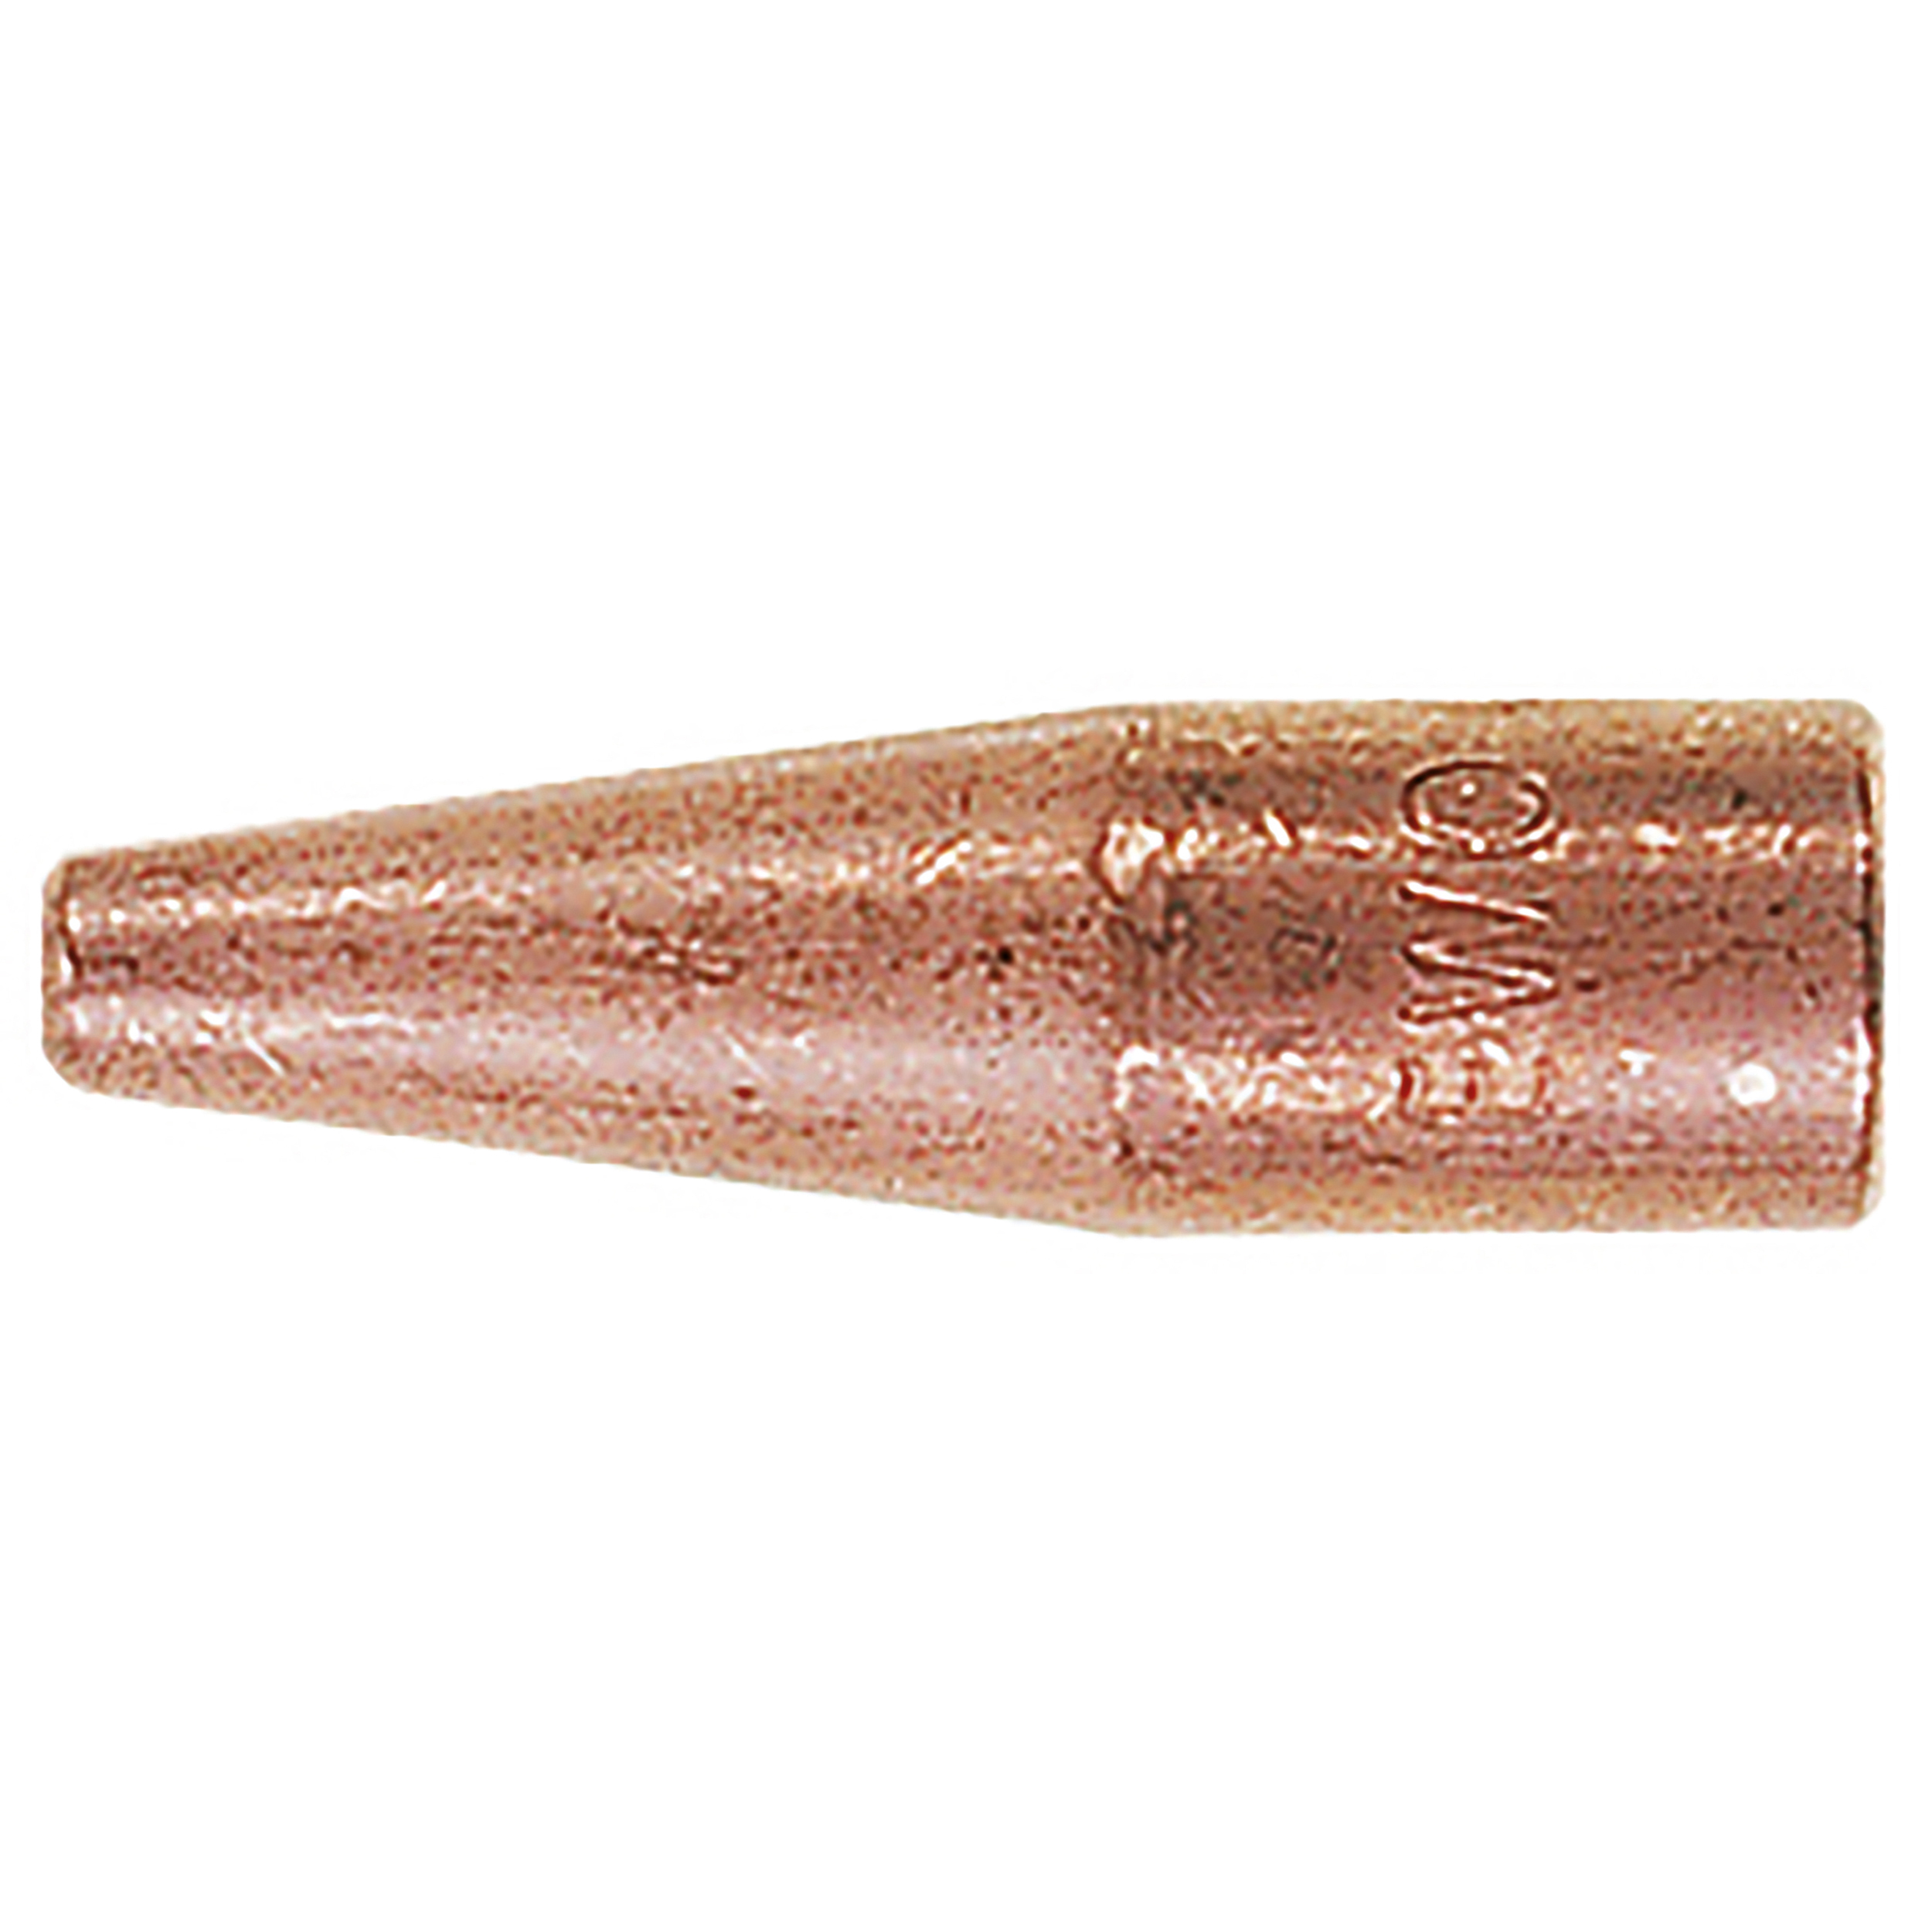 Welding nozzle, fitting for 17 mm shank, Gr. 1, nominal range (mm): 0.5 – 1, thread: 8 × 28 Gg, material: copper